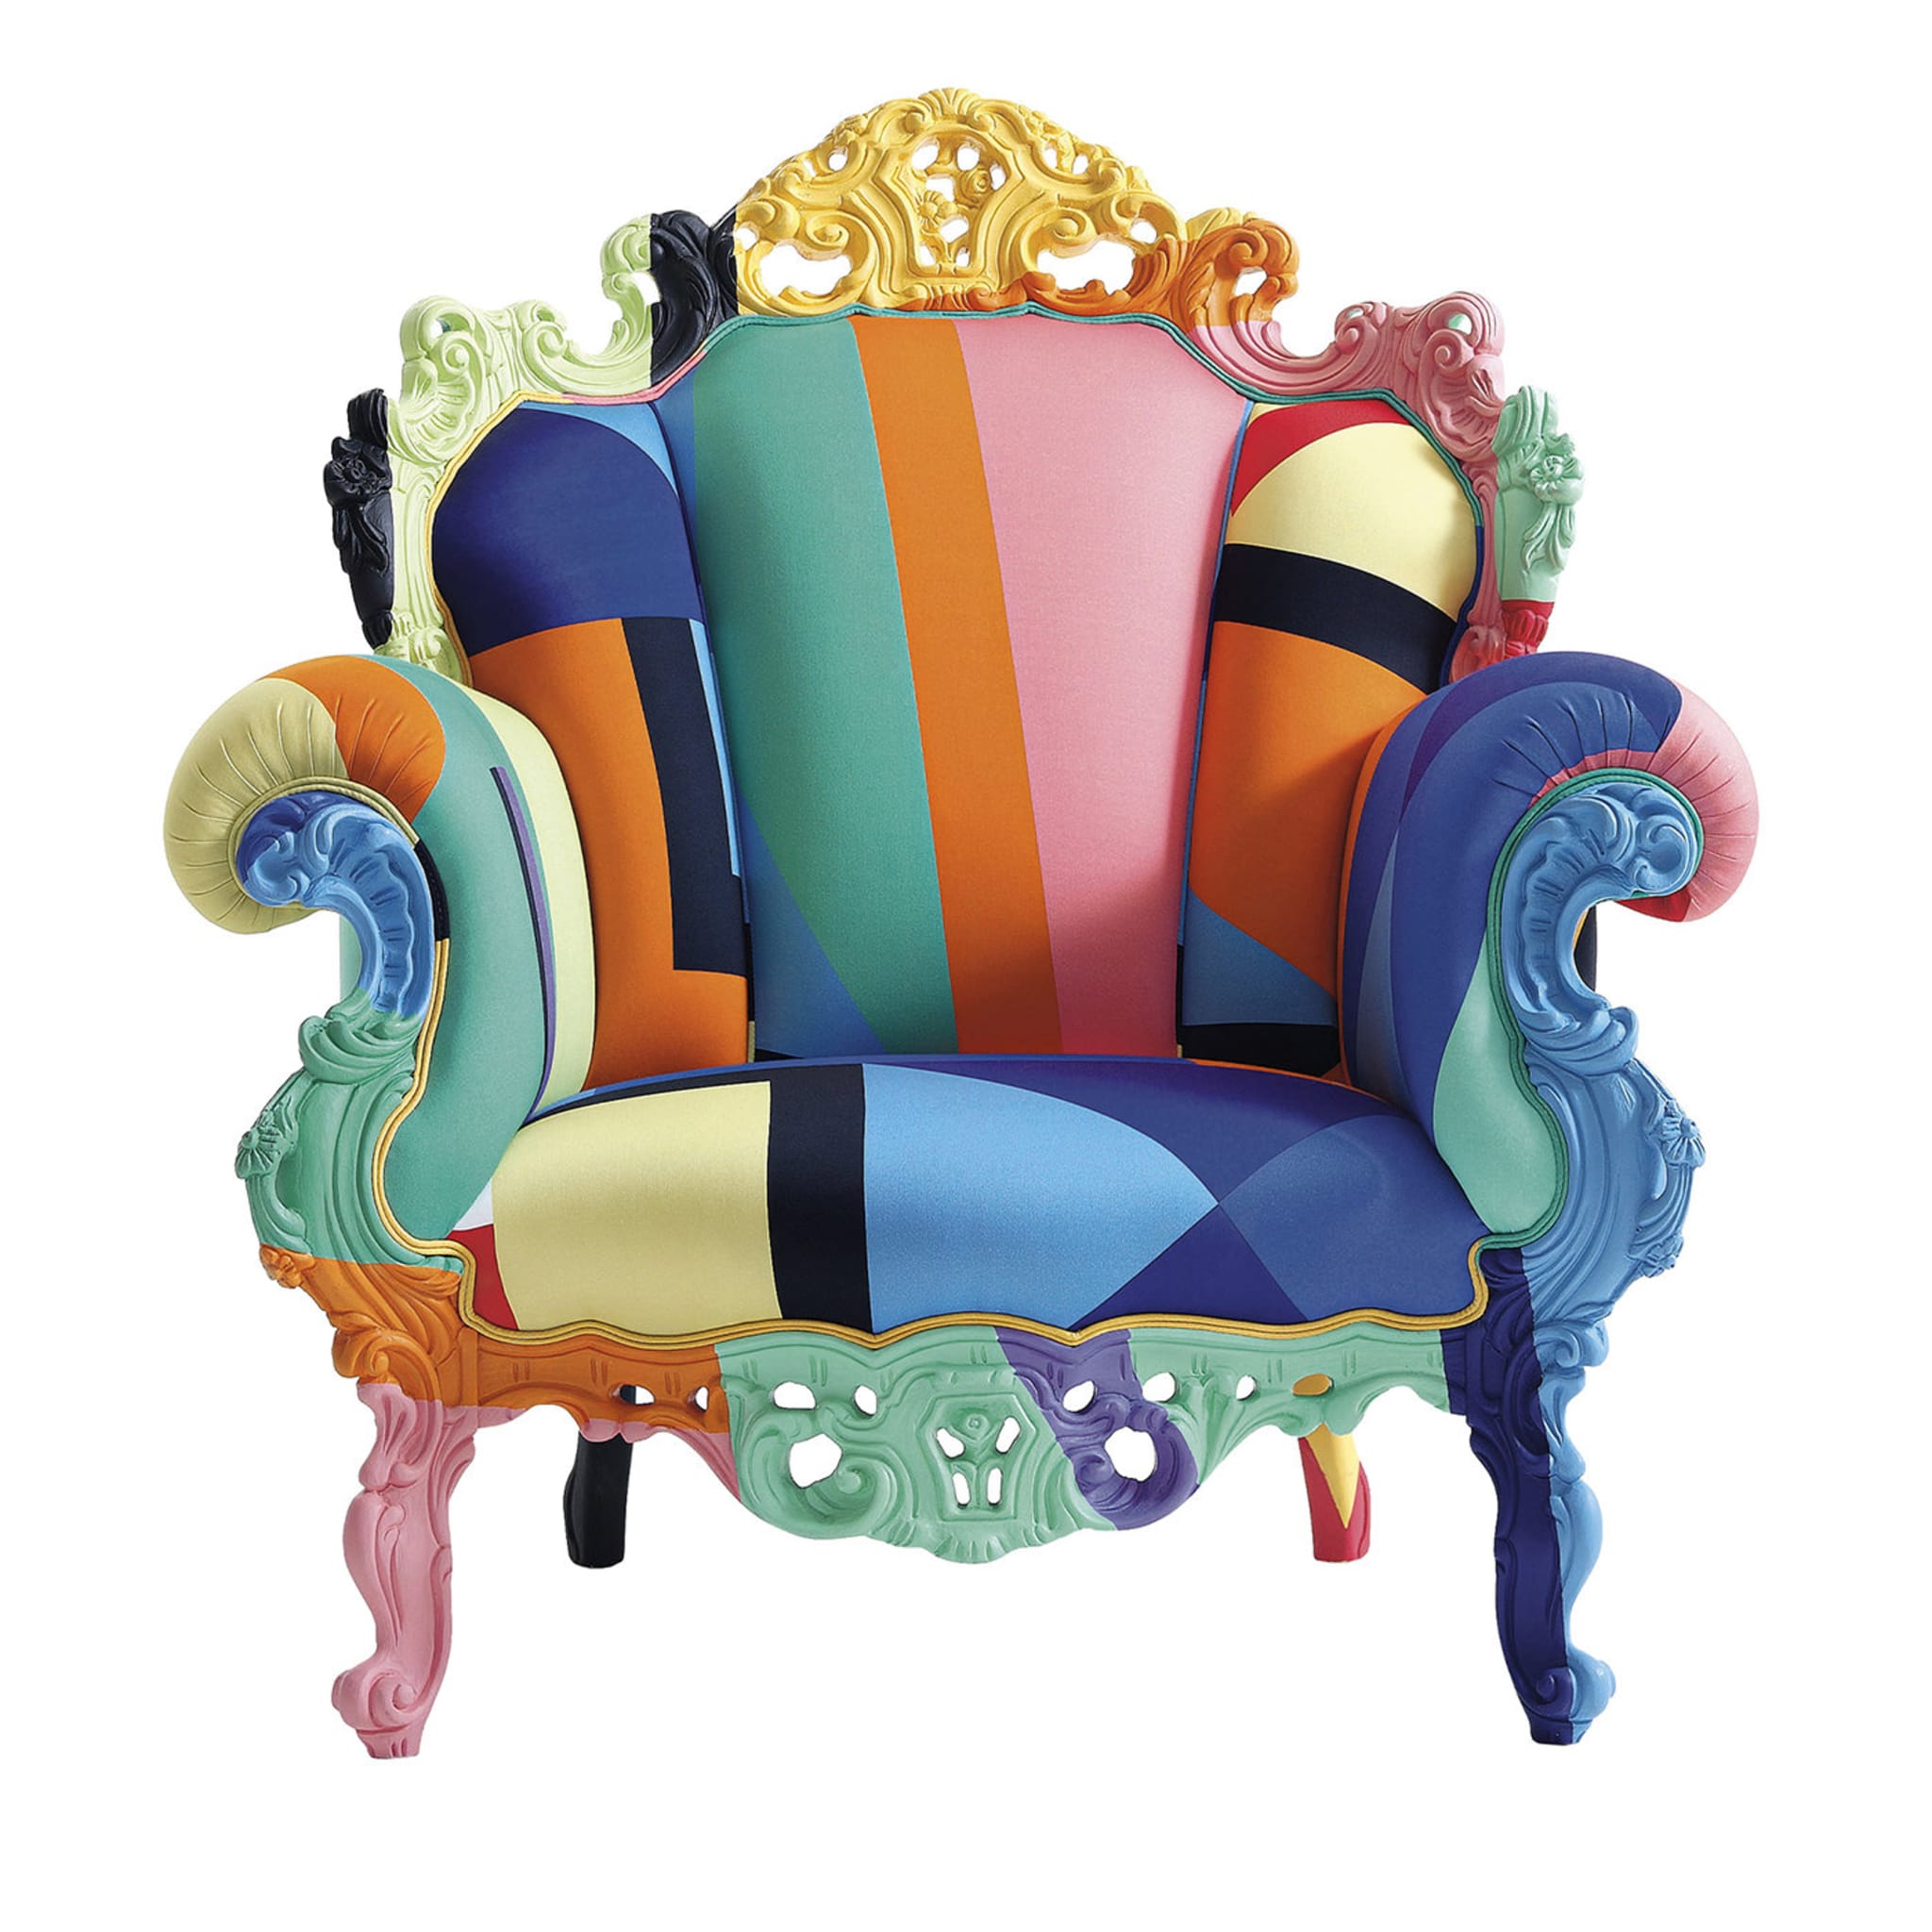 Proust Geometrica Armchair by Alessandro Mendini - Main view